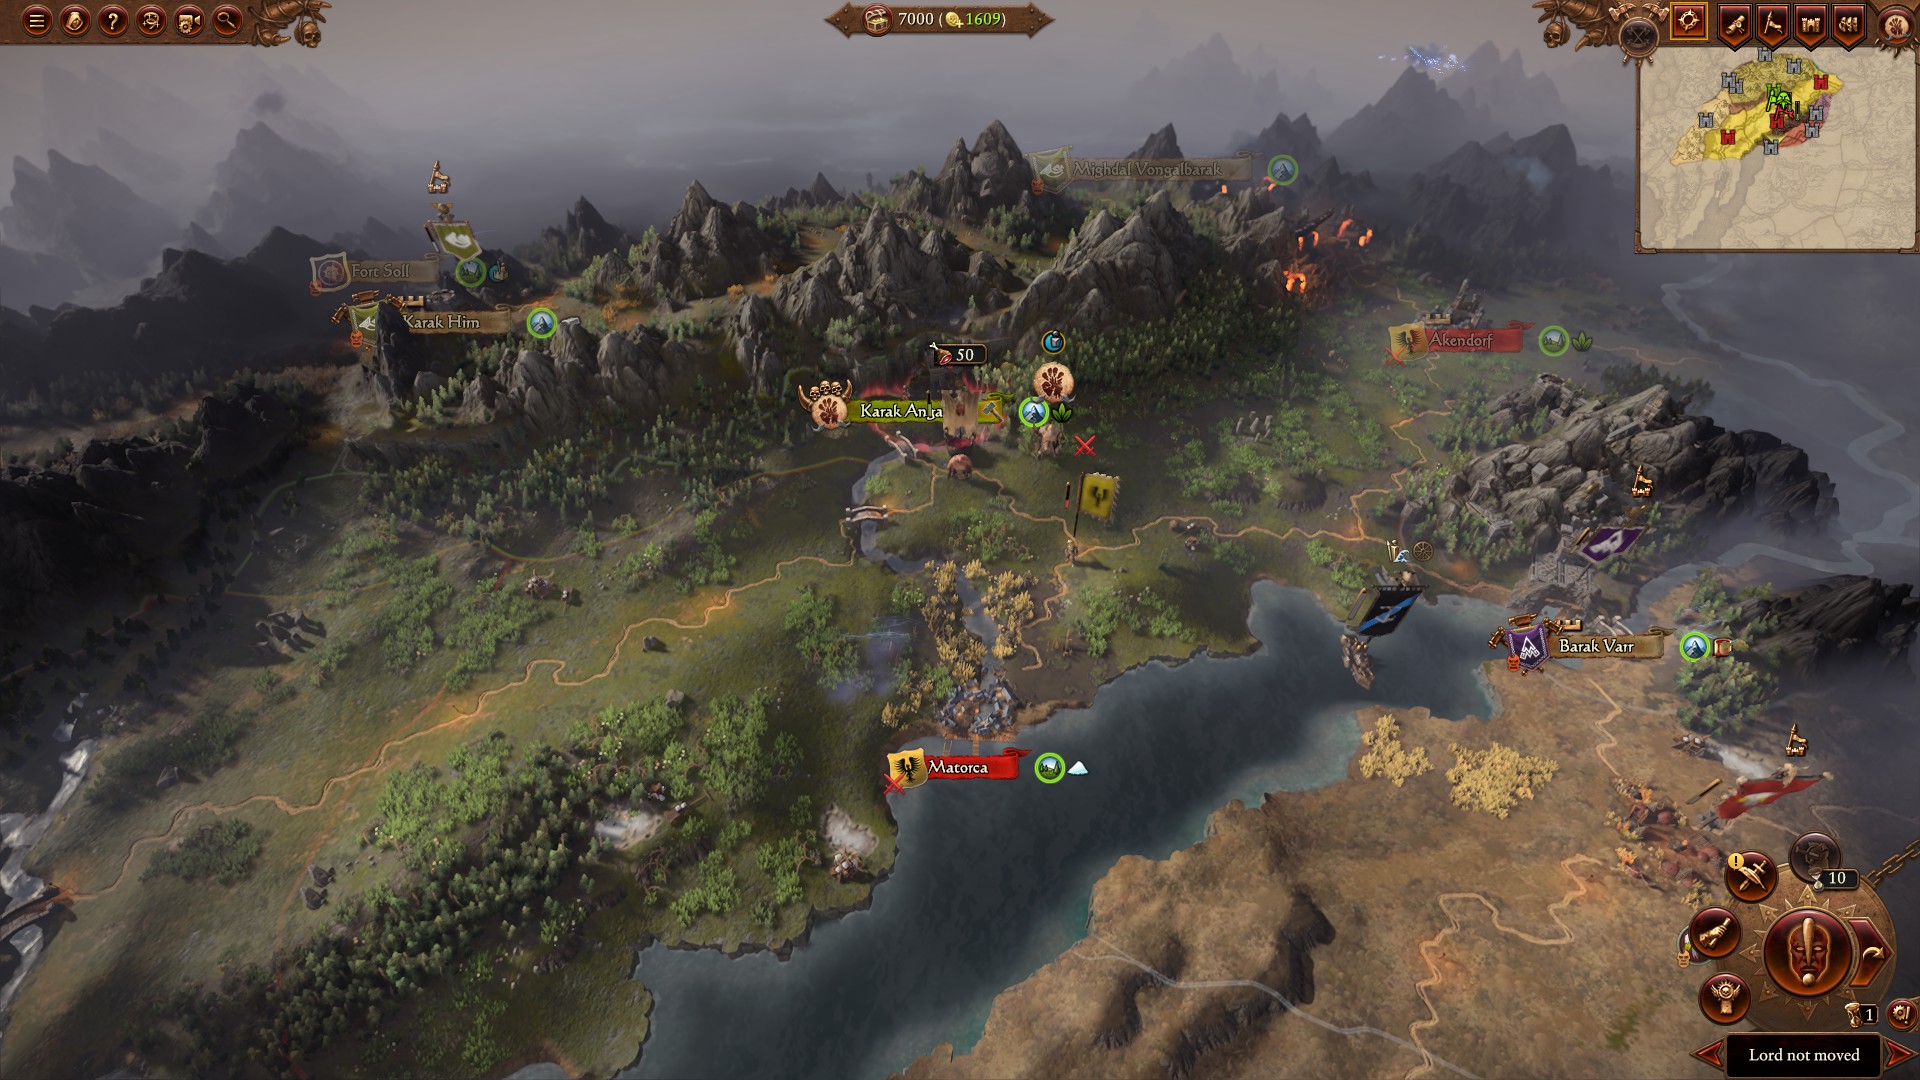 Warhammer 3 Immortal Empires Skrag - Ogre Kingdoms campaign overview, guide and second thoughts image 1